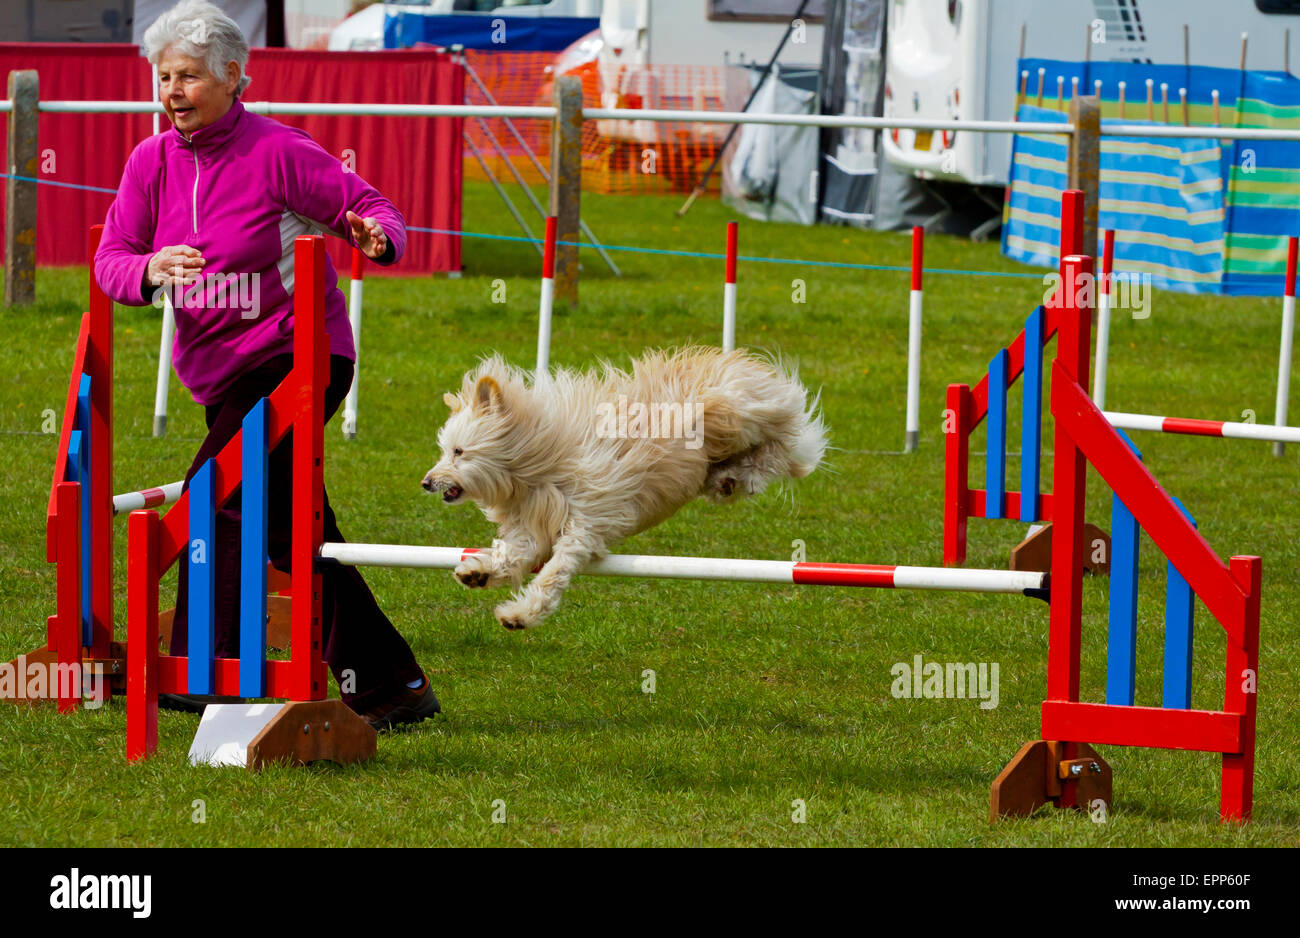 Highly trained domestic pet dog with its owner in an agility competition involving jumps and ramps Derbyshire England UK Stock Photo